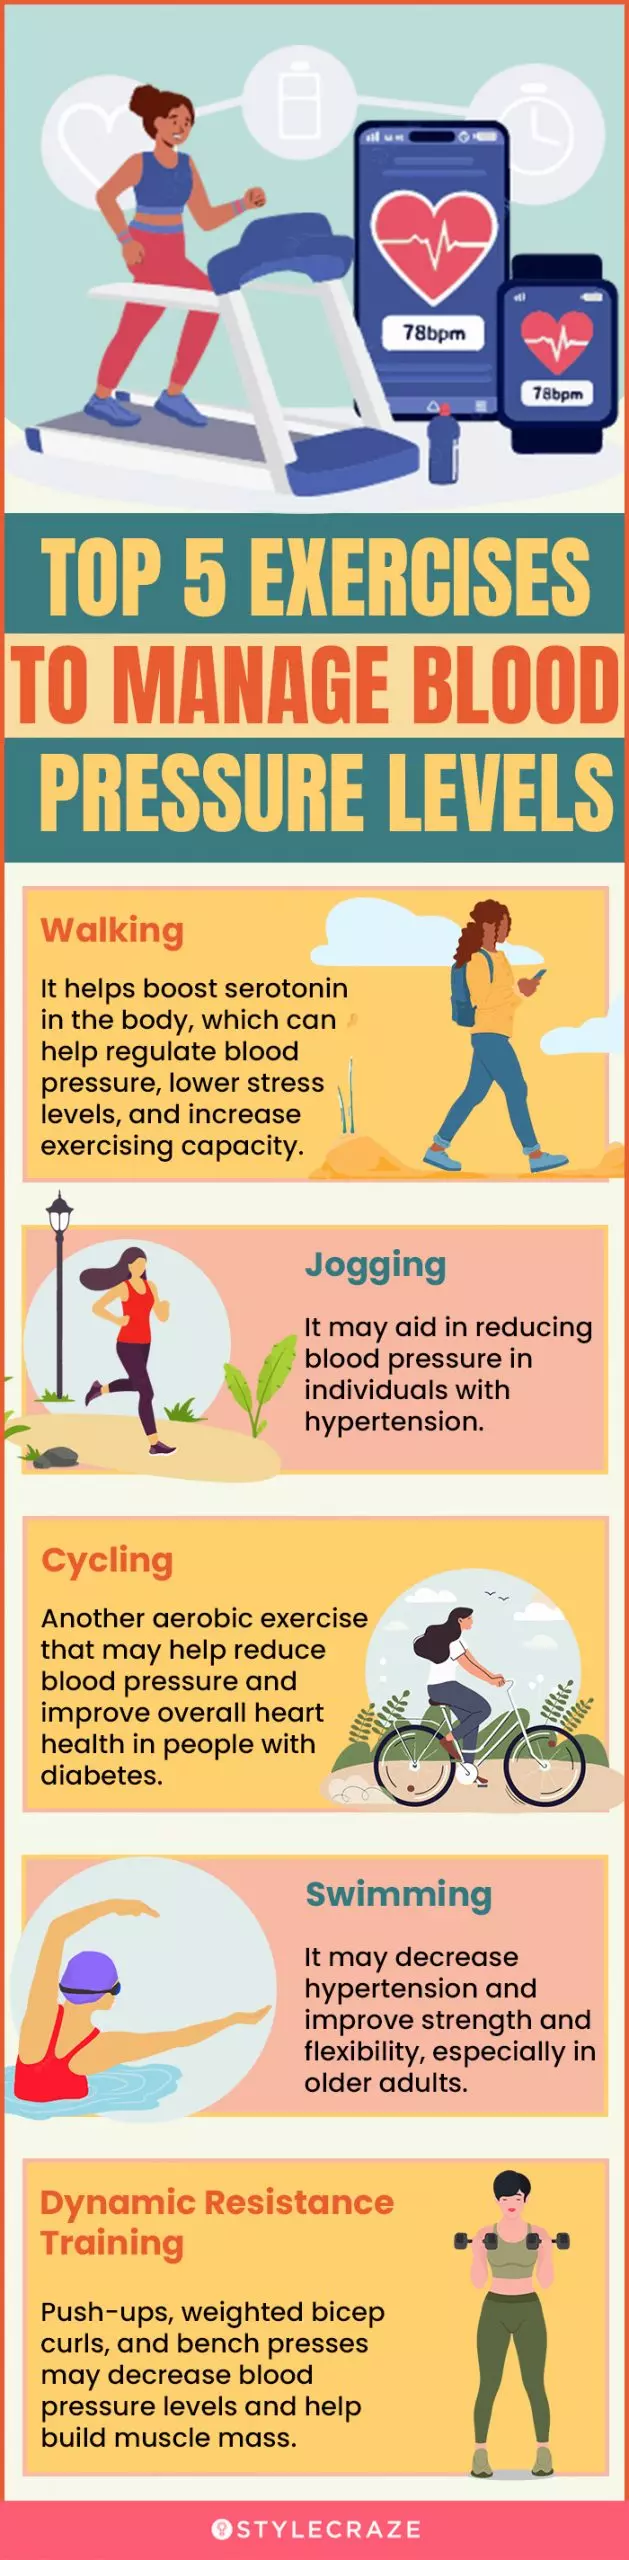 top 5 exercises to manage blood pressure levels (infographic)